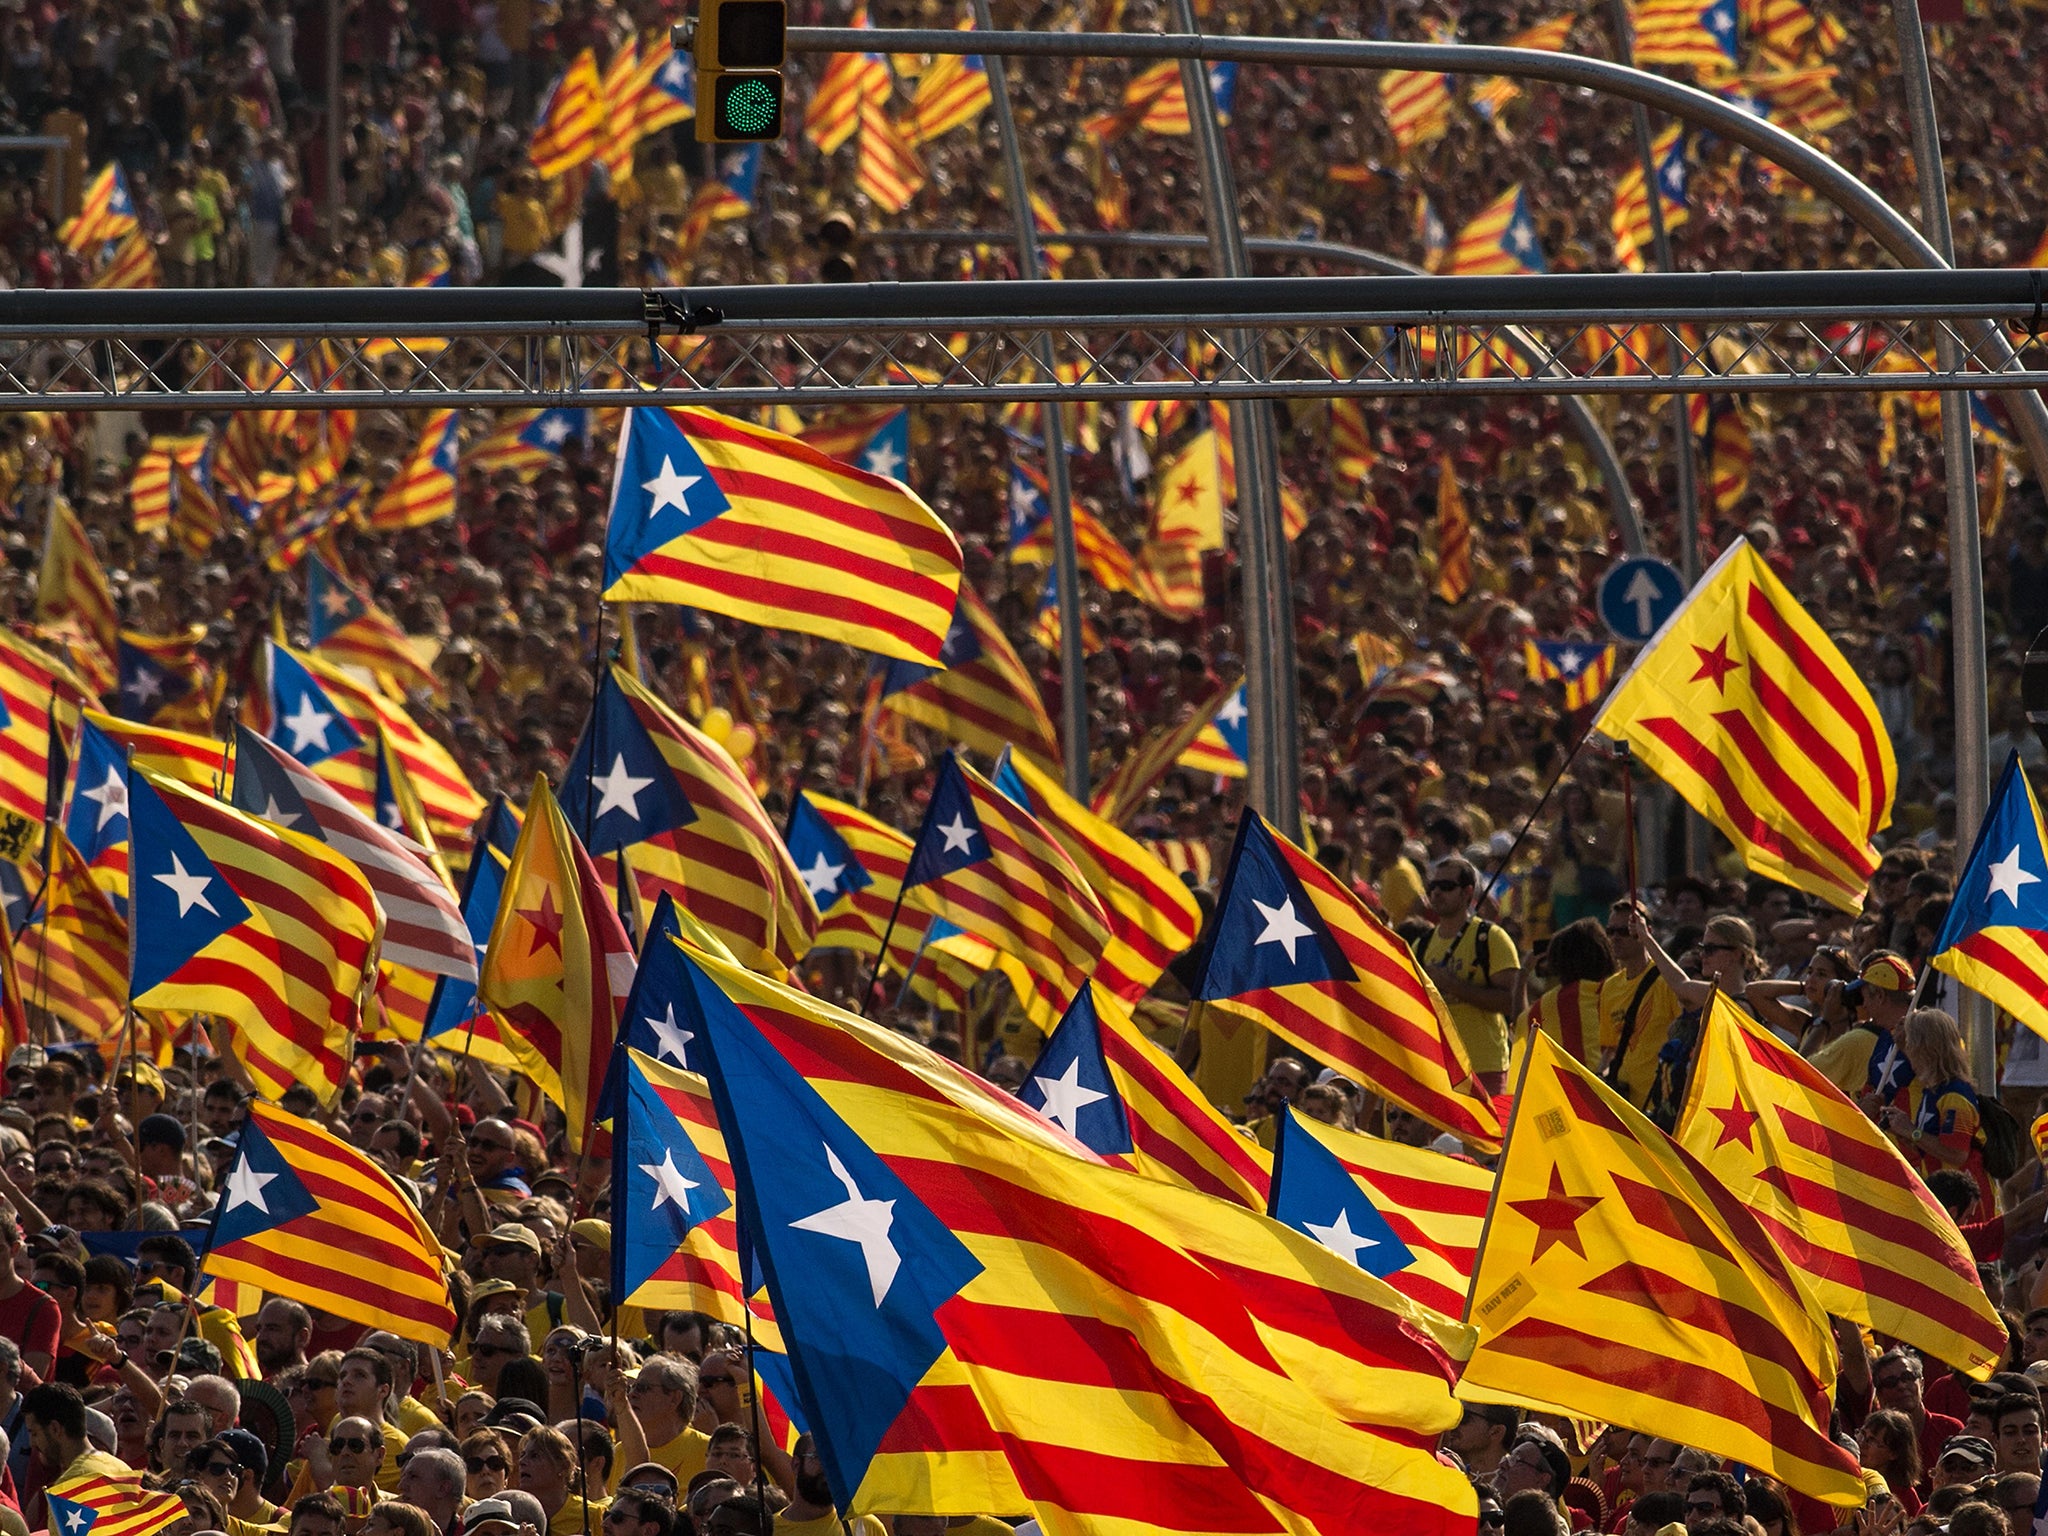 Demonstrators march during a Pro-Independence demonstration as part of the celebrations of the National Day of Catalonia in Barcelona